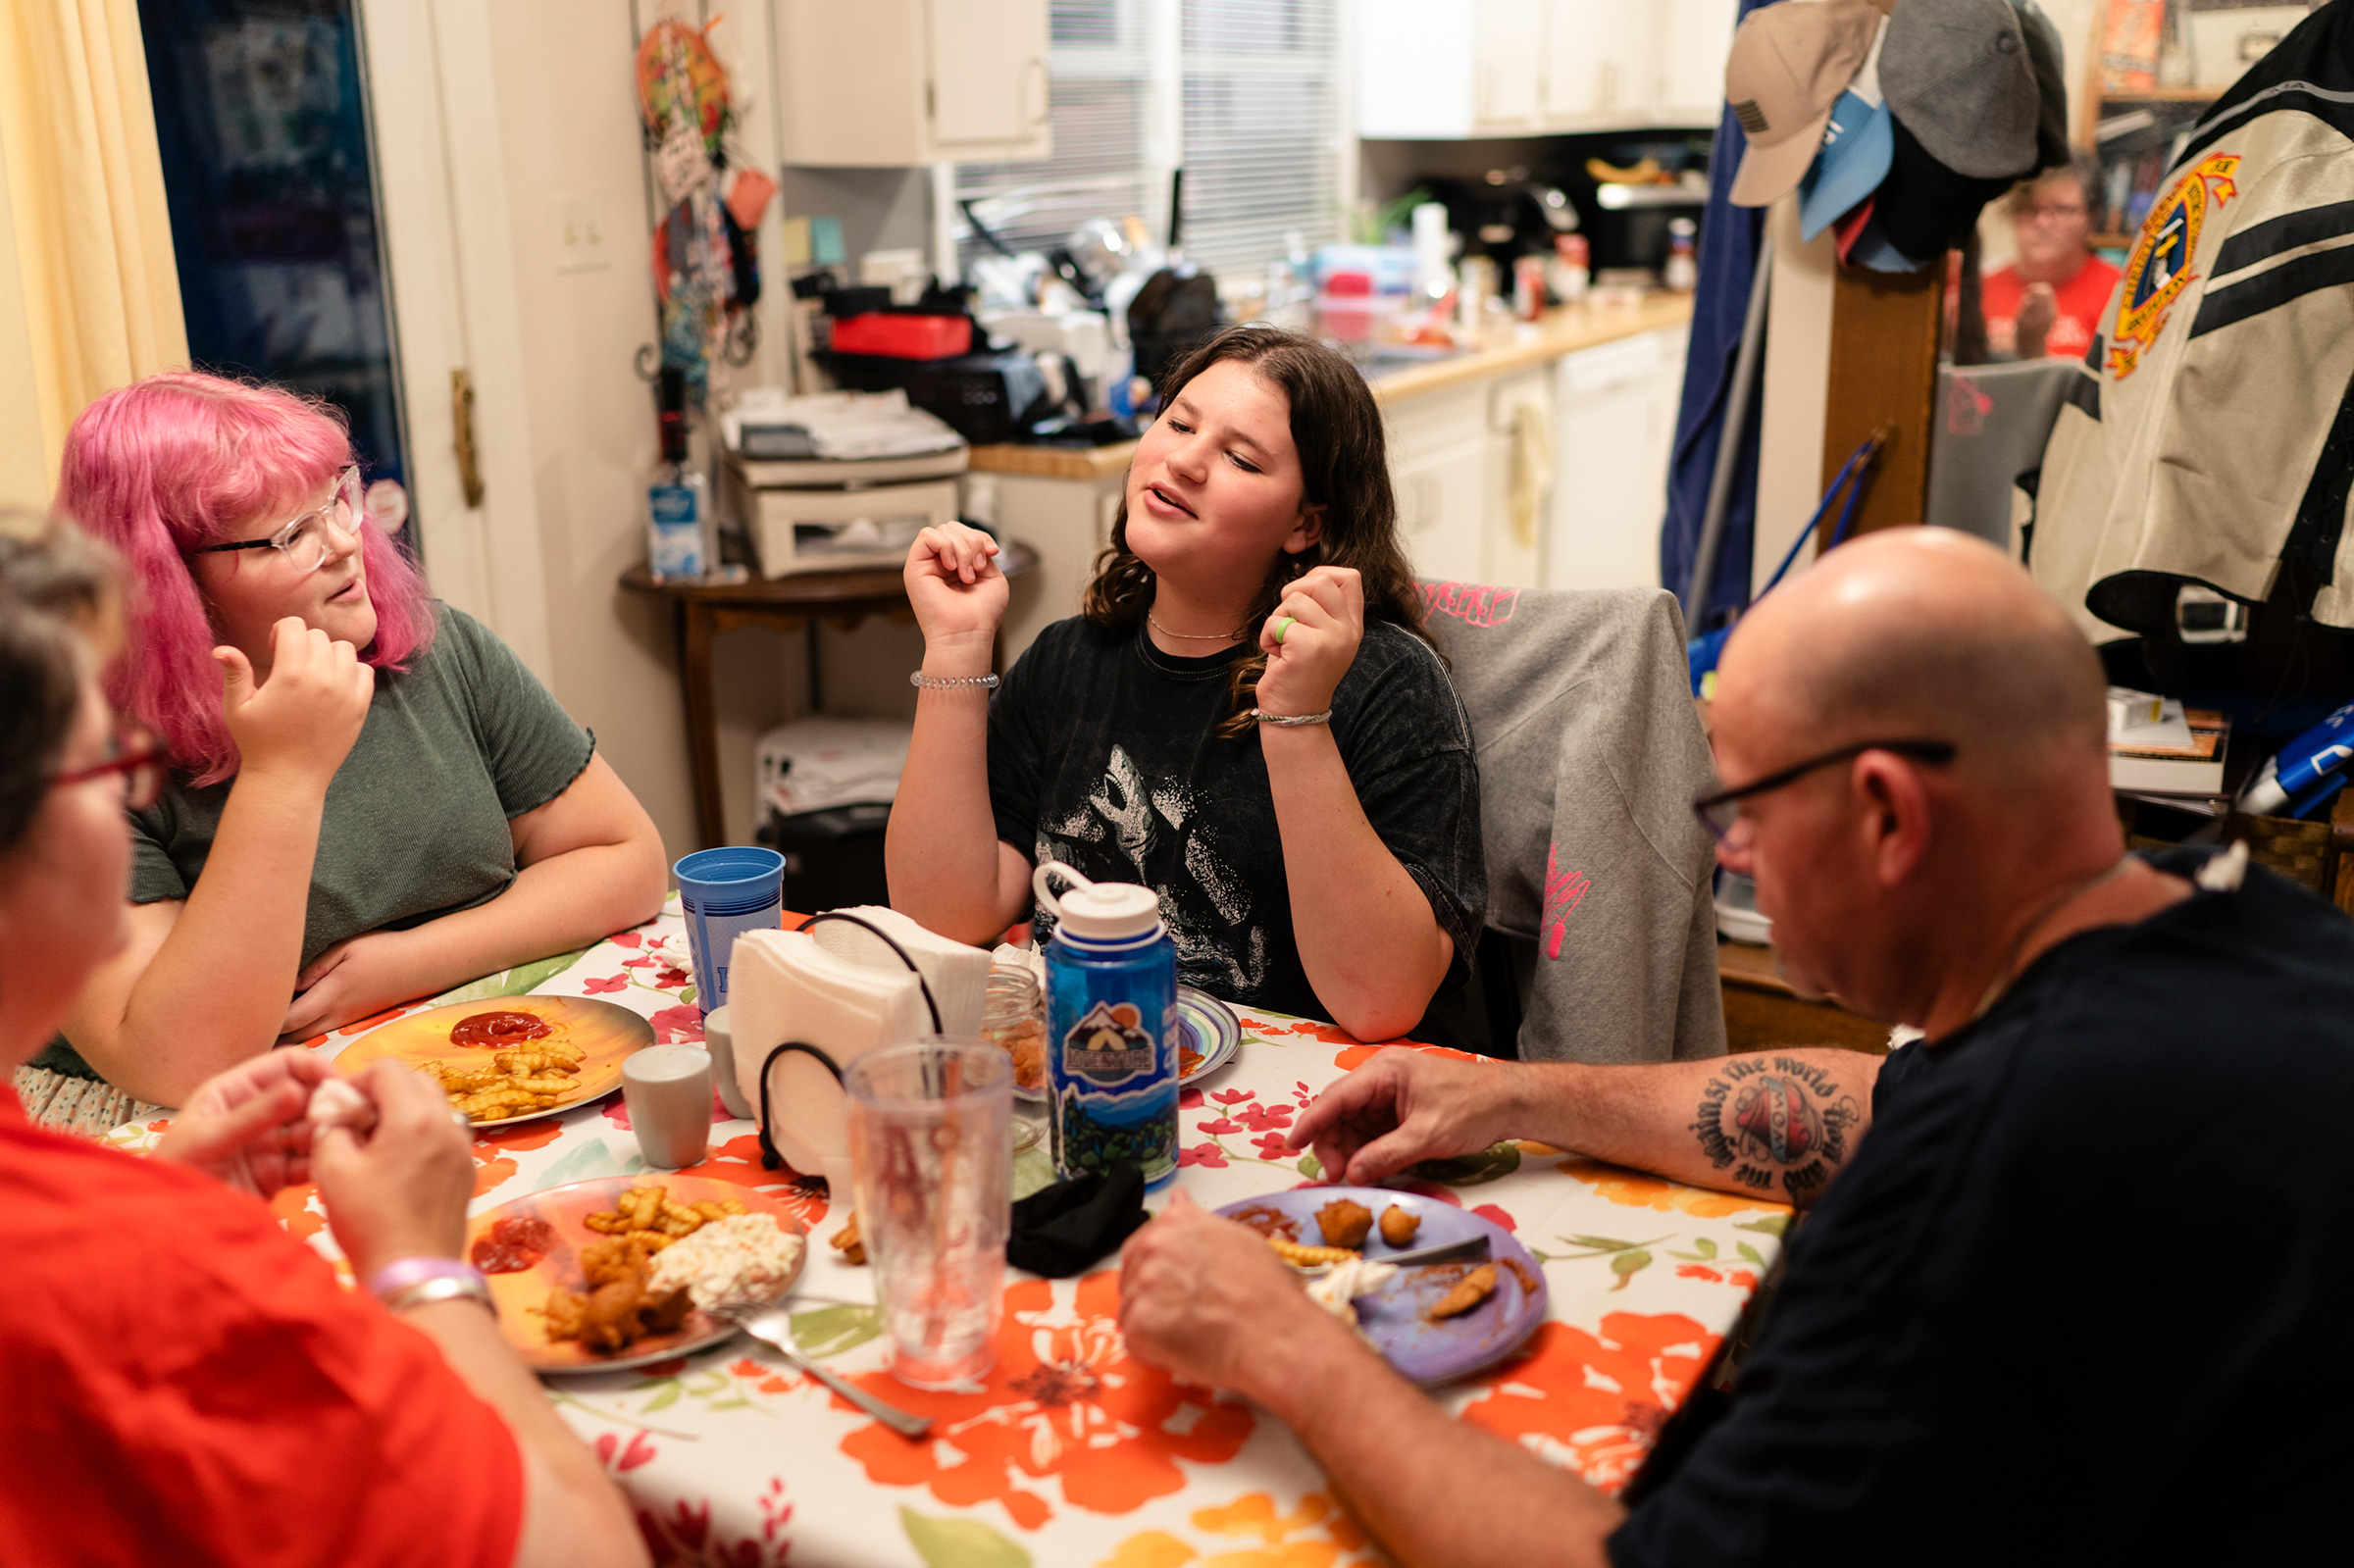 Maddie, 15, right center, eats dinner with her family in North Carolina. “My family is my whole life,” Maddie says. Whenever they have to make a decision, she says, they always consider how it will impact all four of them. “I love that for us,” she says. “All the times I’m with my family, whether we’re fighting or whether we’re laughing, it’s always good times.”